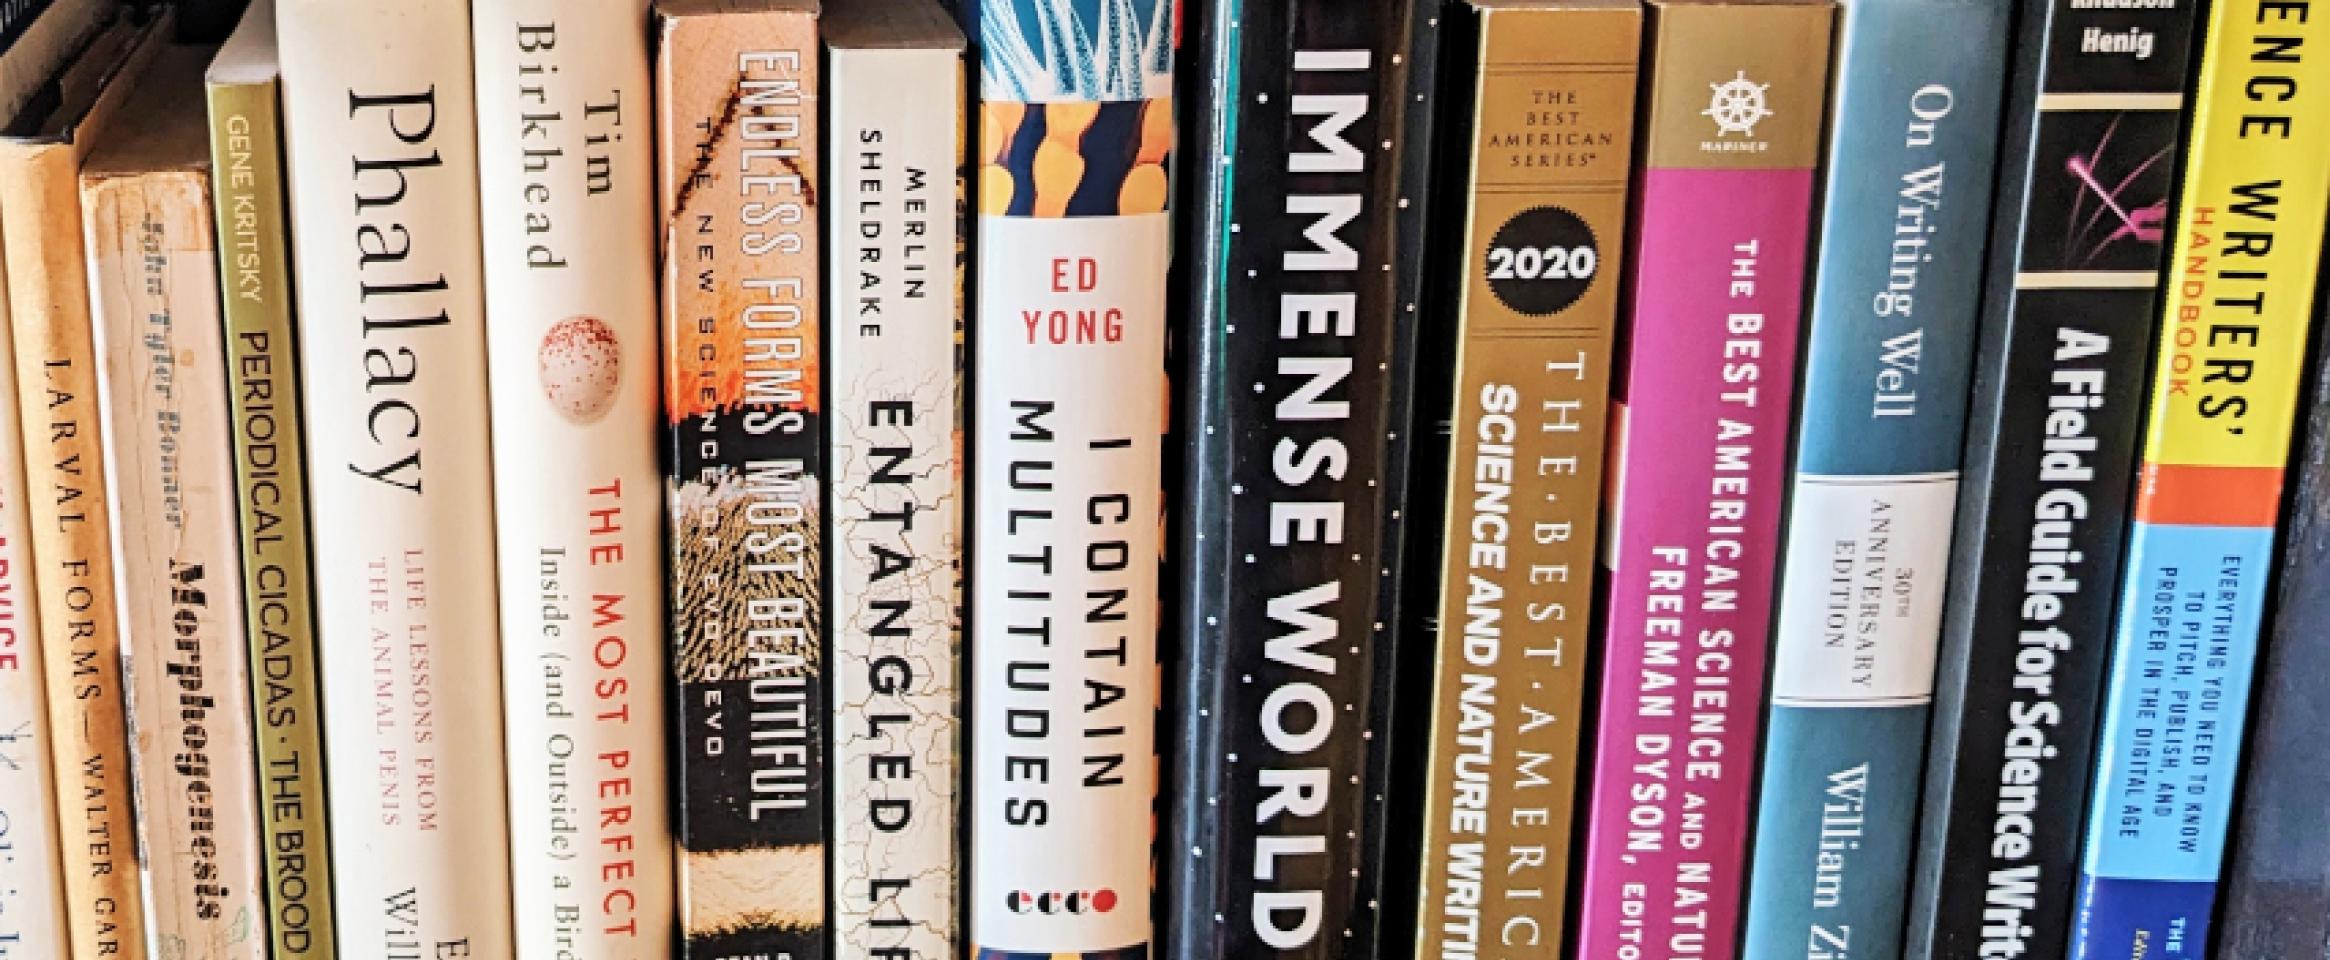 Rectangular photo of a closeup of books on a shelf, spanning titles on science writing. Photo by Danna Staaf